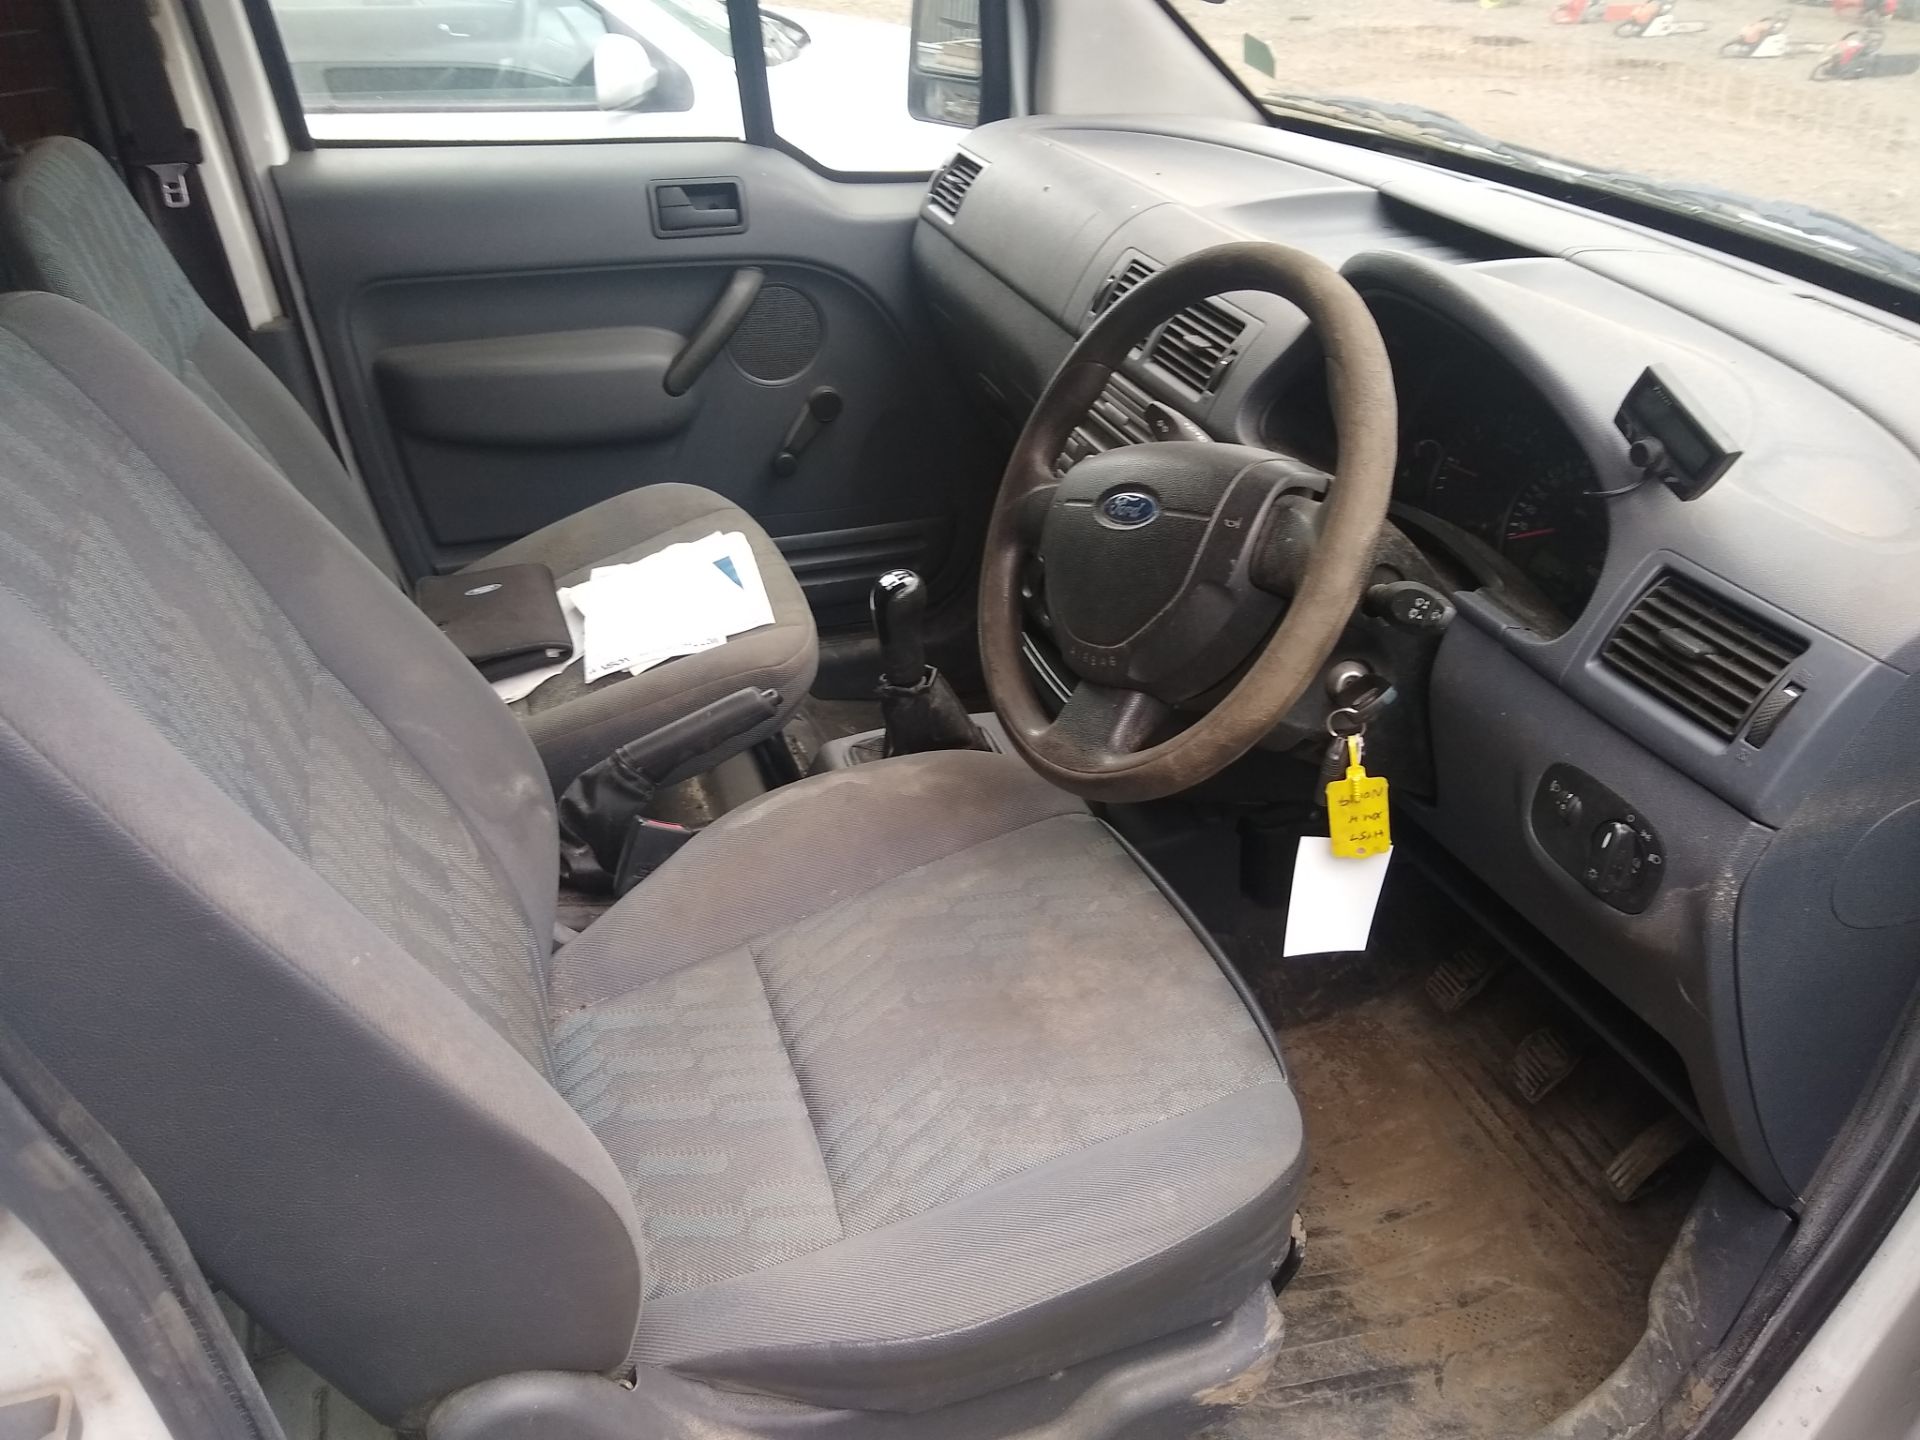 2007 Ford Transit Connect 1.8 Diesel Van, HY57XMH - Image 4 of 8